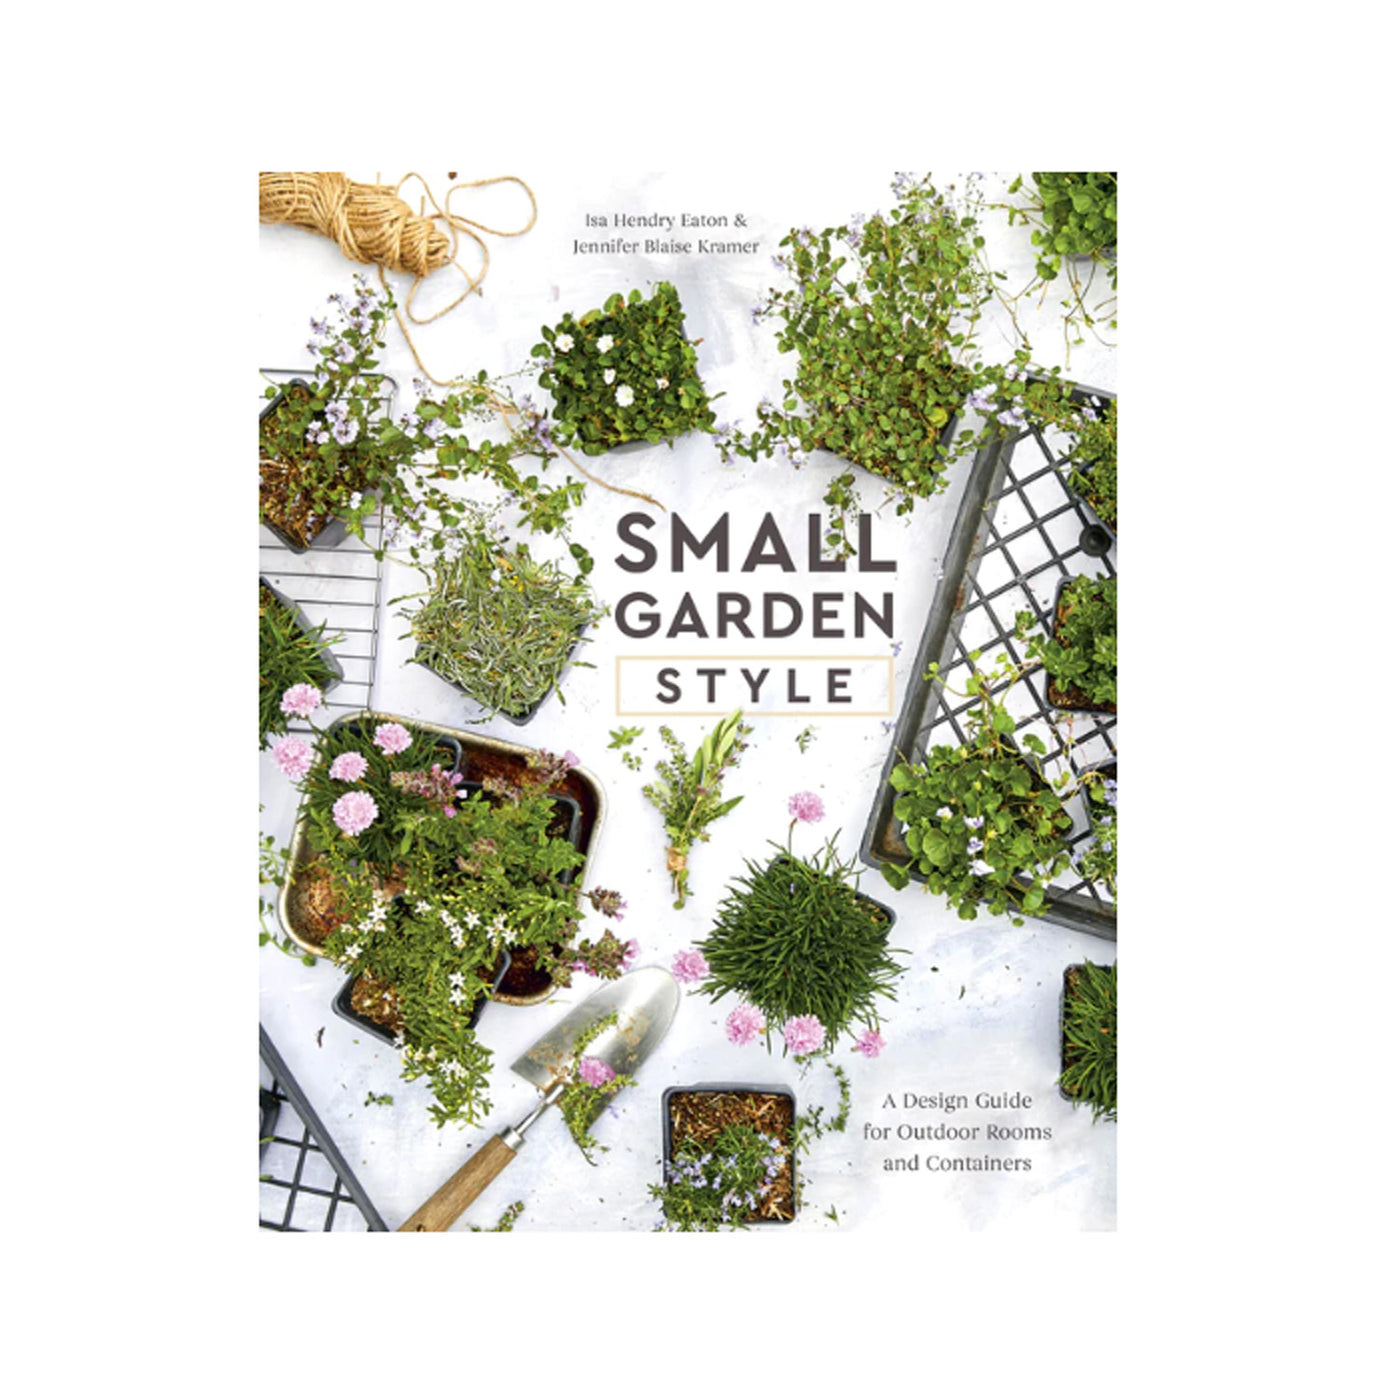 Book titled Small Garden Style